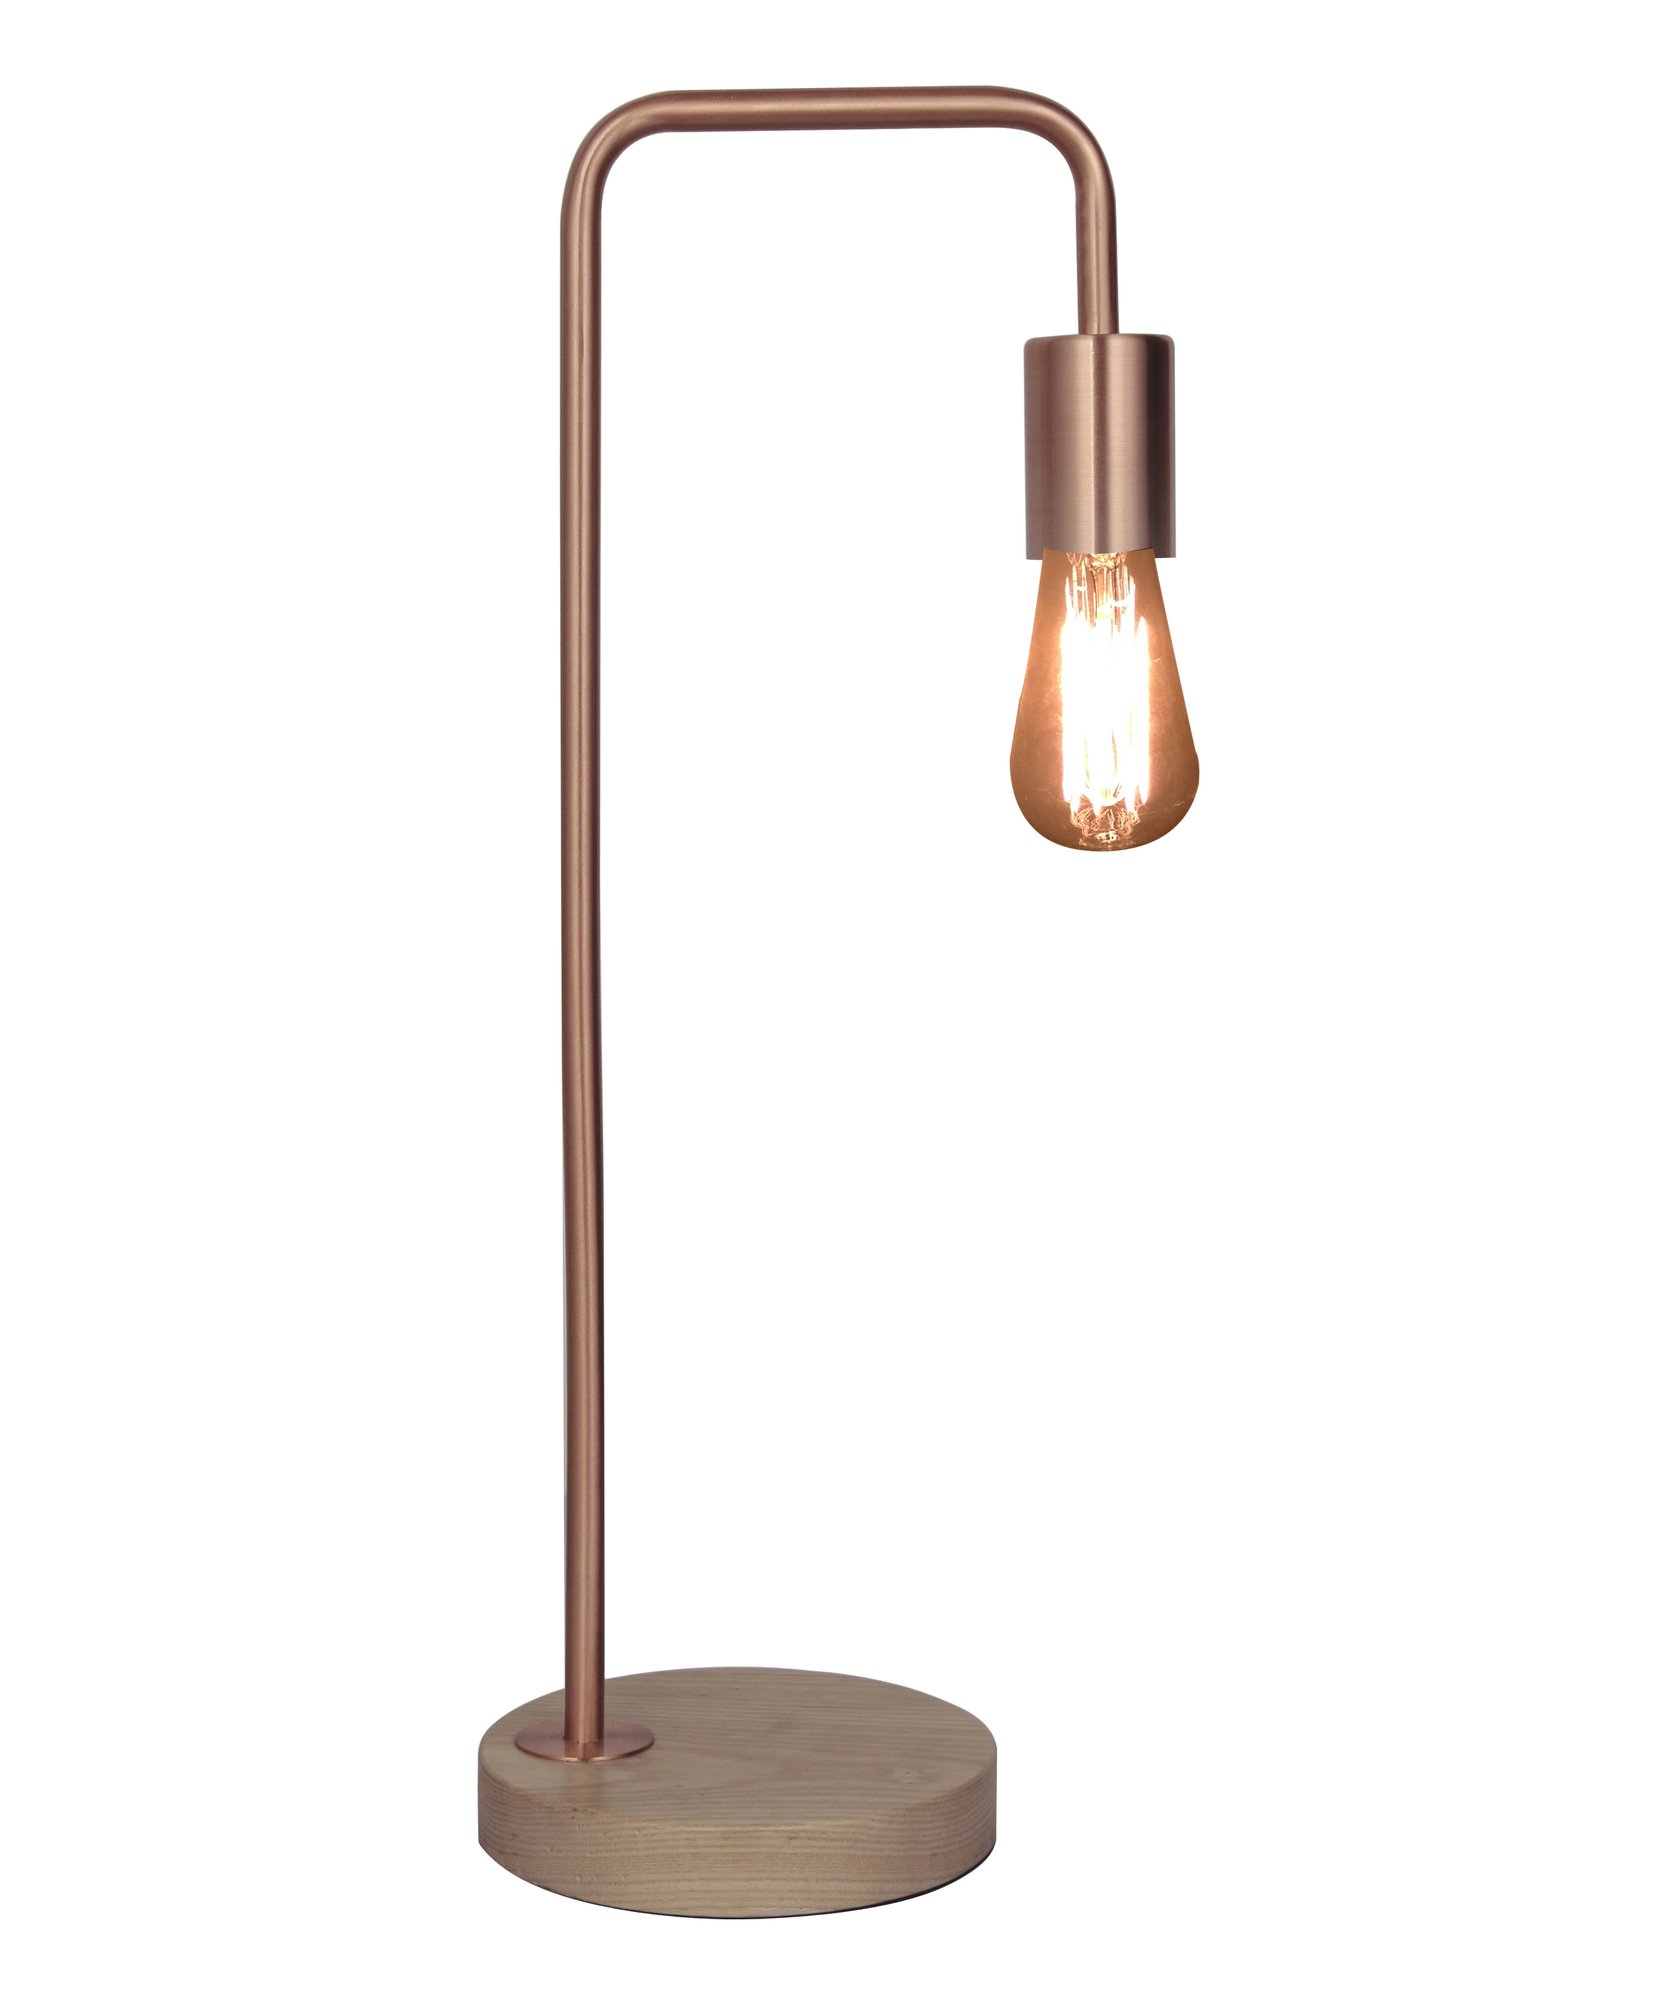 Copper Table Lamp - Temple And Webster - $89